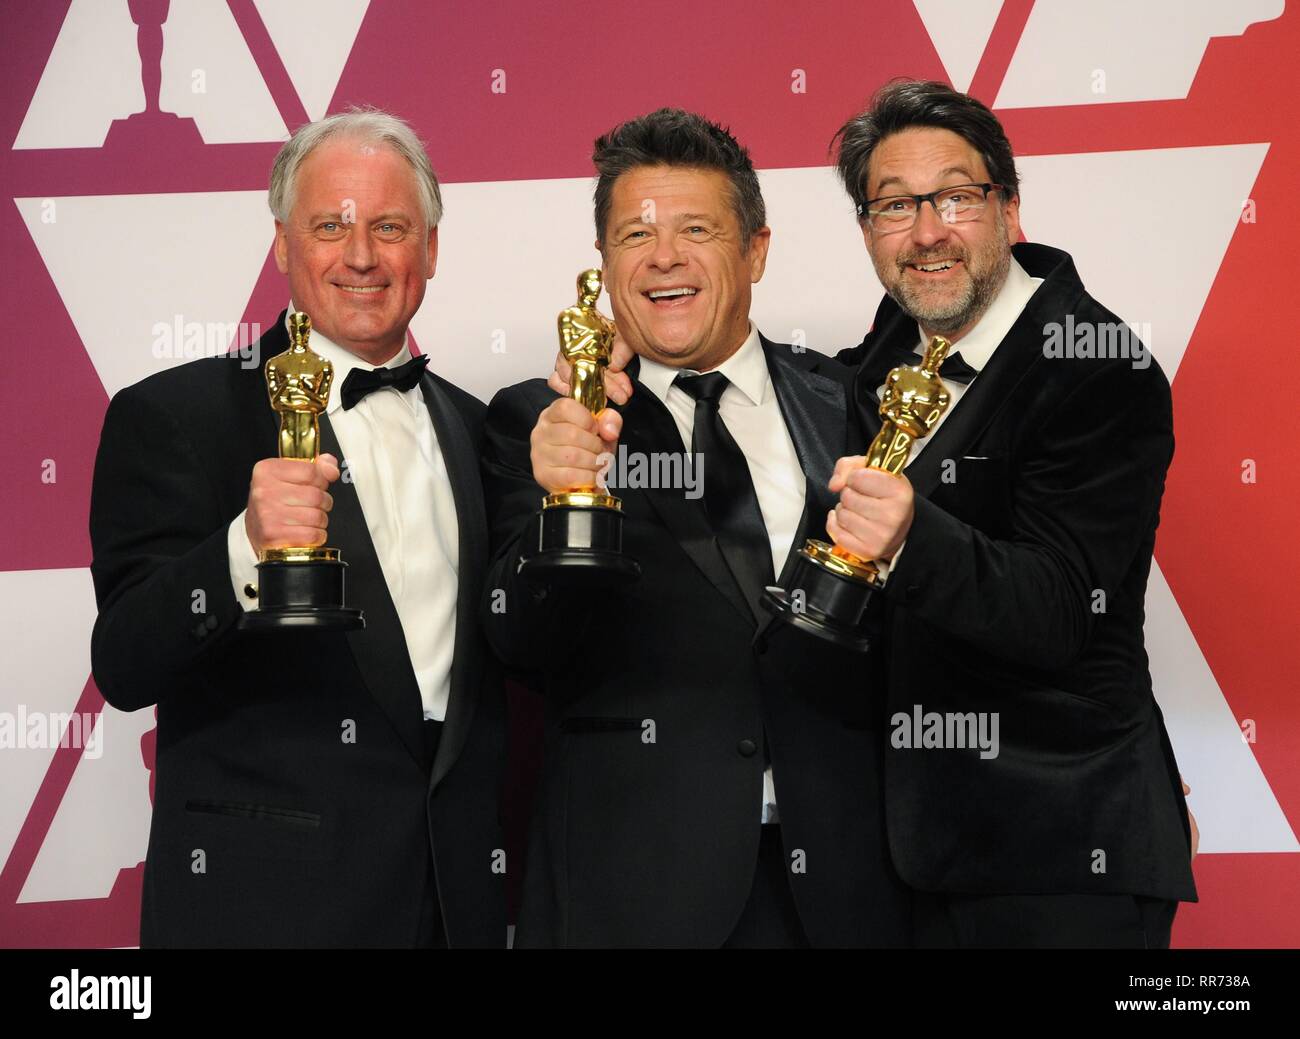 Los Angeles, CA, USA. 24th Feb, 2019. Paul Massey, Tim Cavagin, John Casali in the press room for The 91st Academy Awards - Press Room, The Dolby Theatre at Hollywood and Highland Center, Los Angeles, CA February 24, 2019. Credit: Elizabeth Goodenough/Everett Collection/Alamy Live News Stock Photo